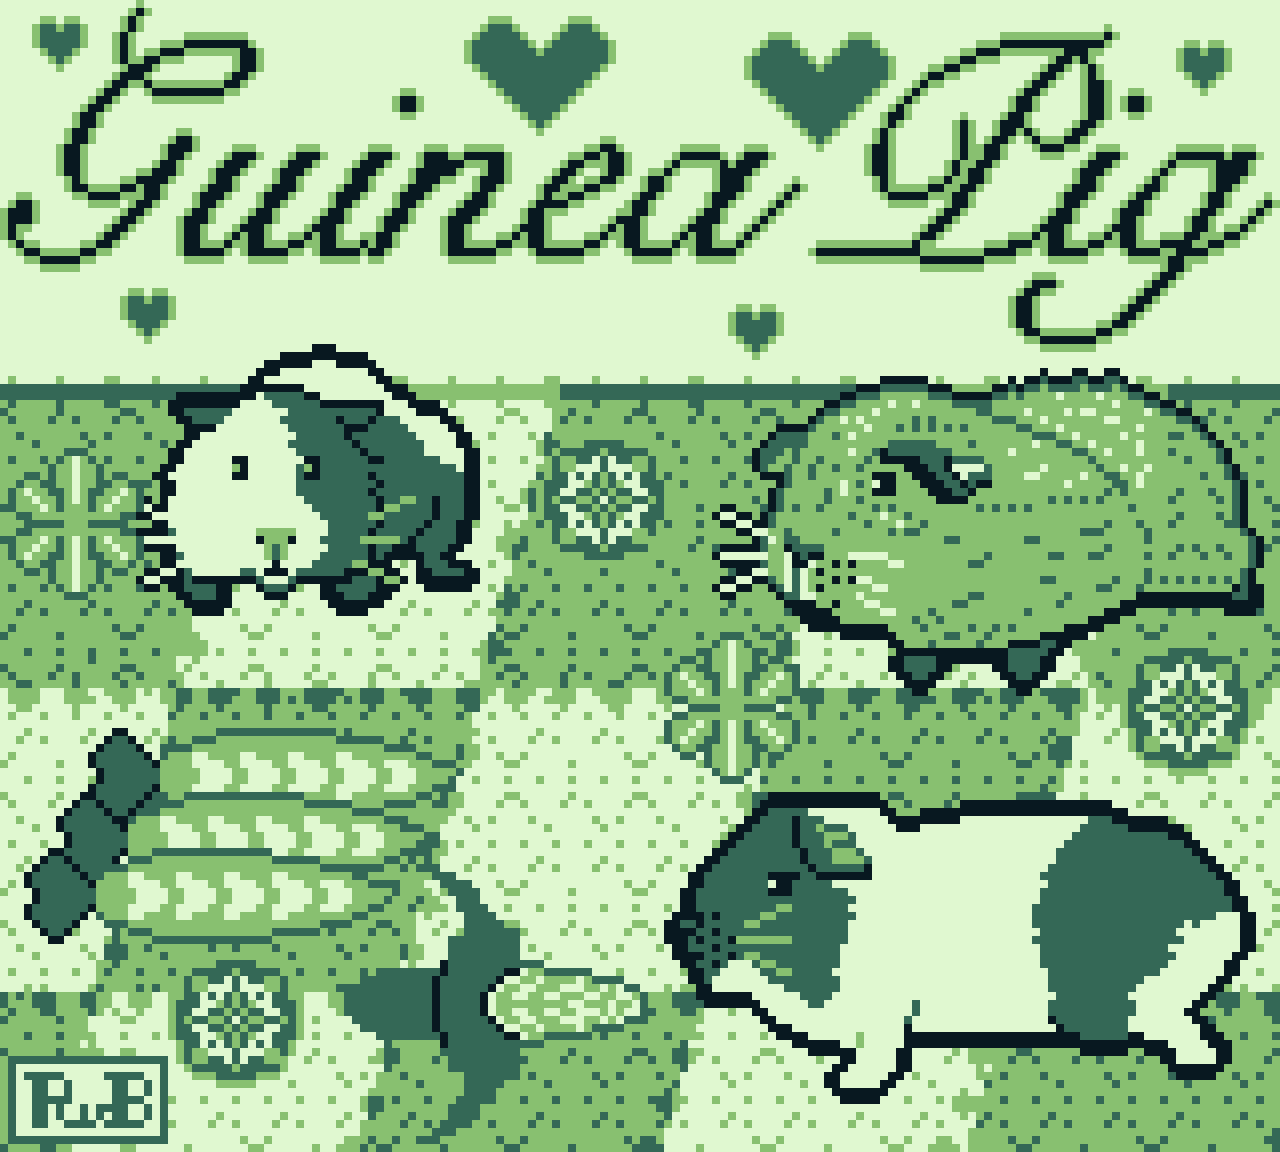 pixel art with guinea pigs on a spread